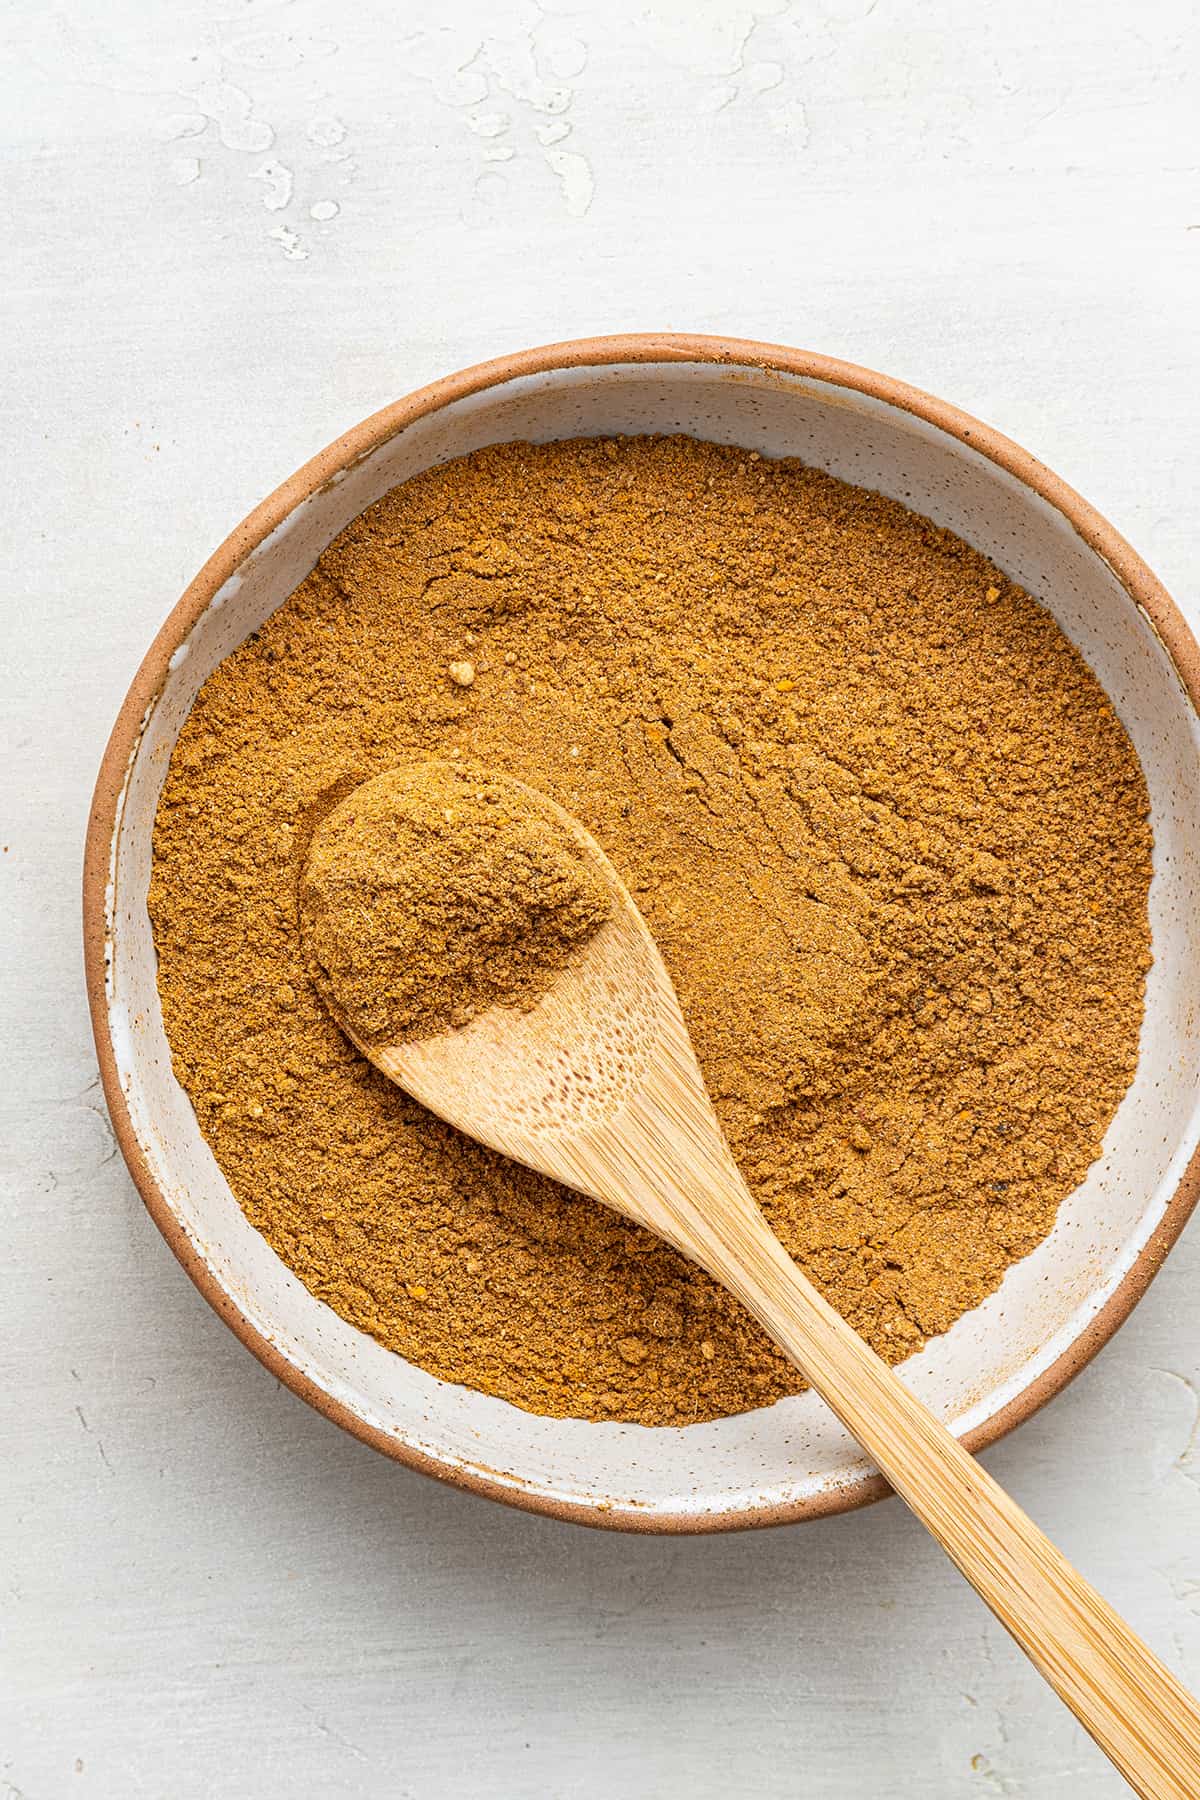 Overhead view of a wooden spoon in a bowl of ras el hanout